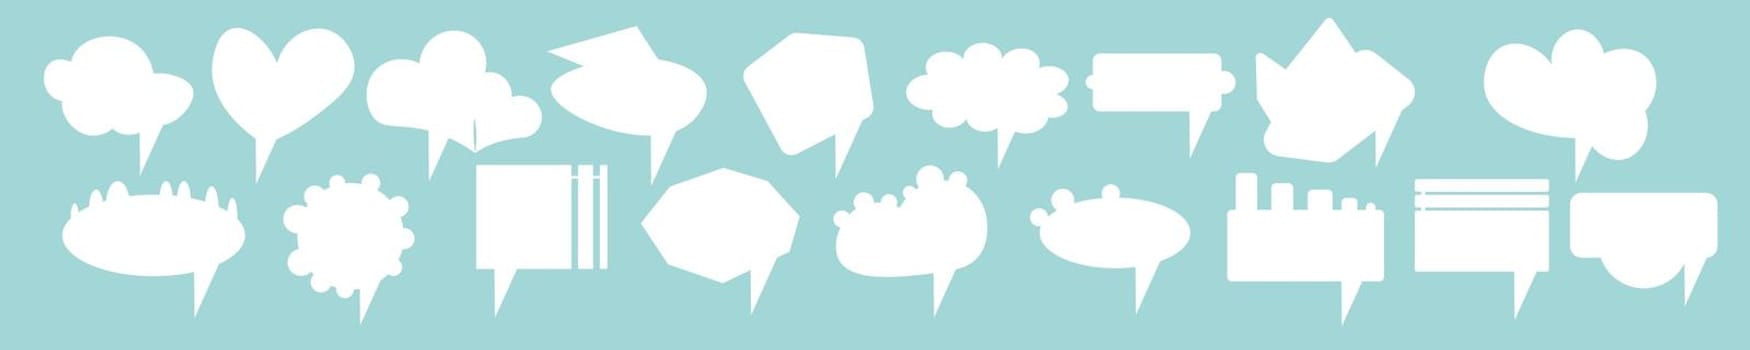 Big set of vector white comic speech bubbles on blue background. Isolated colorful banner, empty paper shape. Cartoon flat illustration for chat. Template frame. Hand draw style, dialog cloud